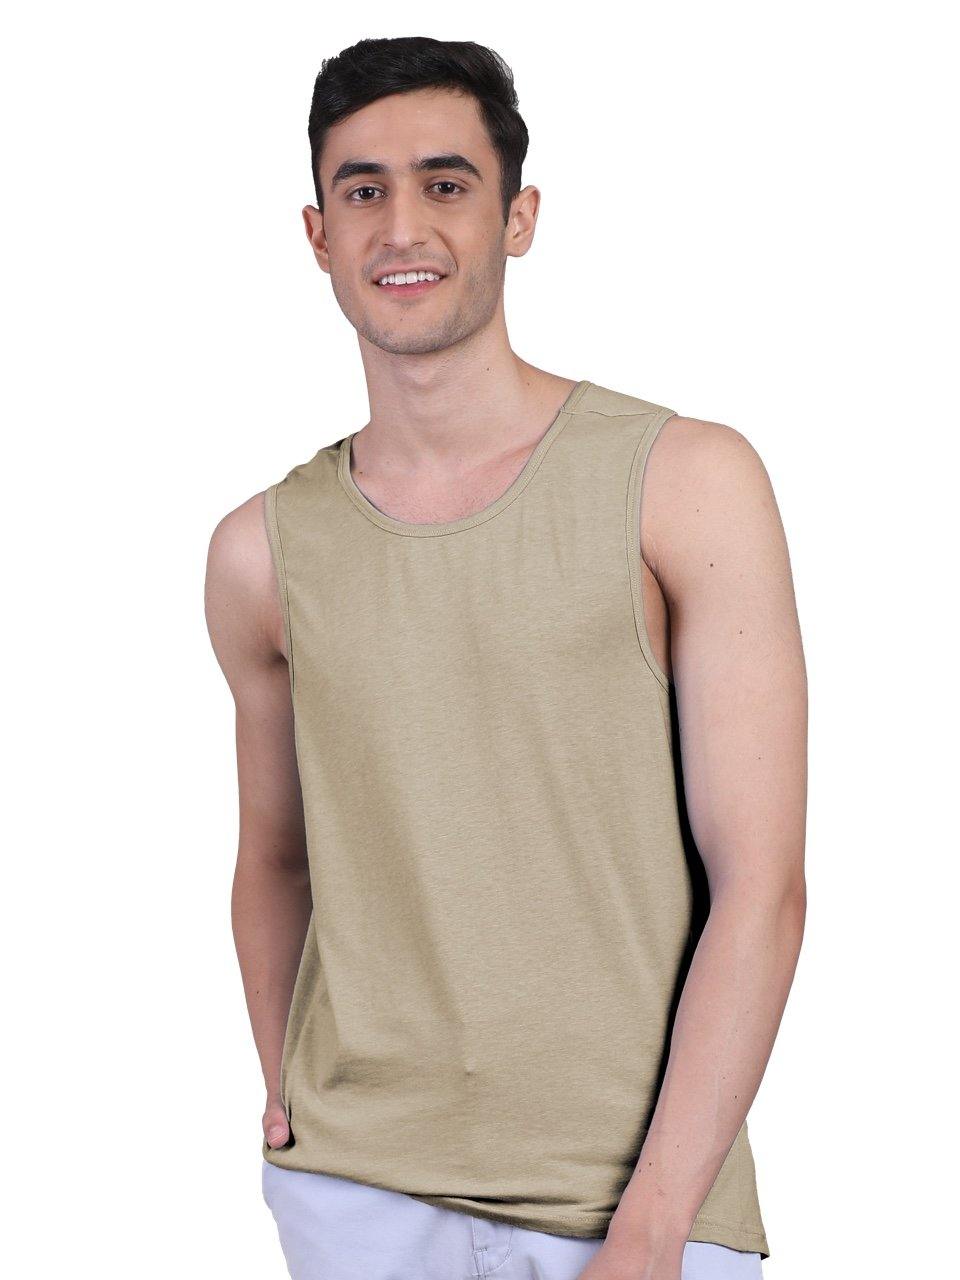 Twin Skin Organic Bamboo Vest - Active Fit (Pack of 3) - freecultr.com